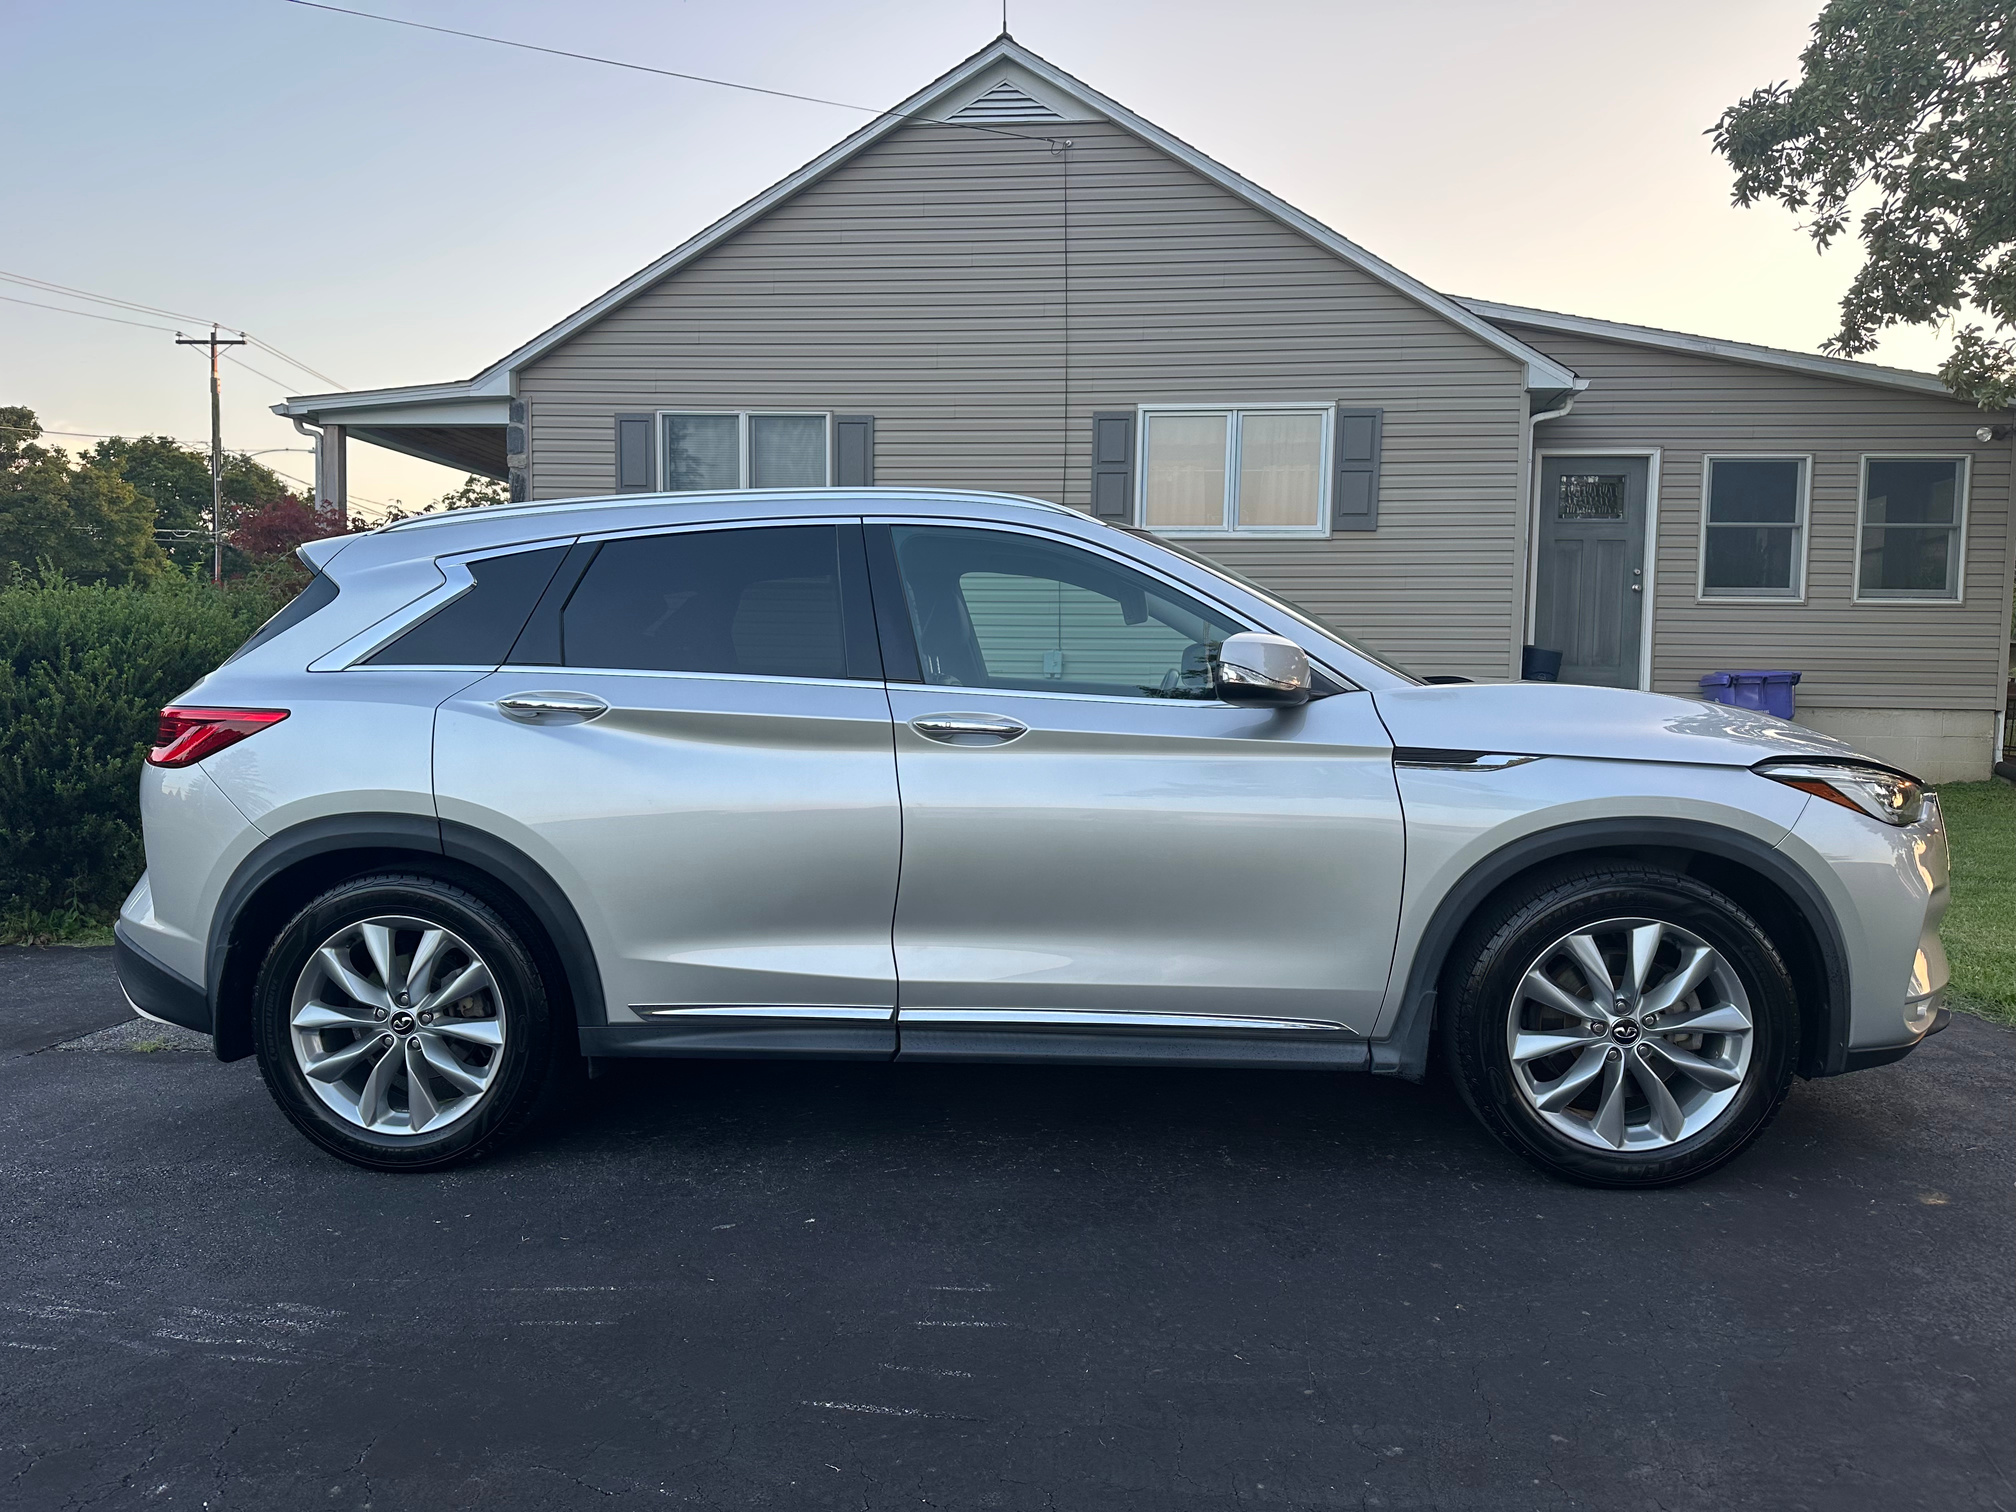 This Infinity QX50 received a basic exterior and interior detail.